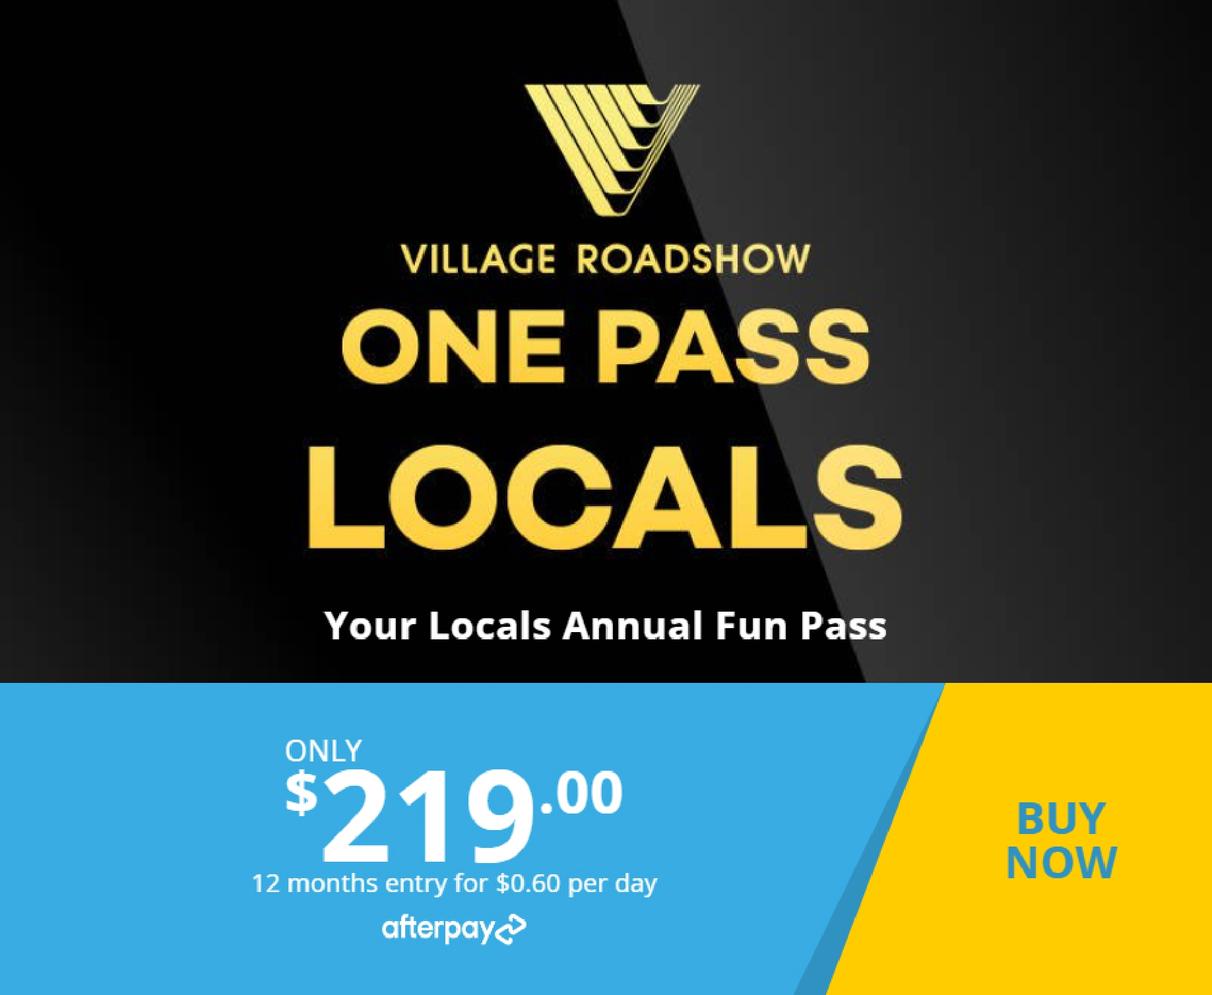 One Pass Locals offers in Movie World